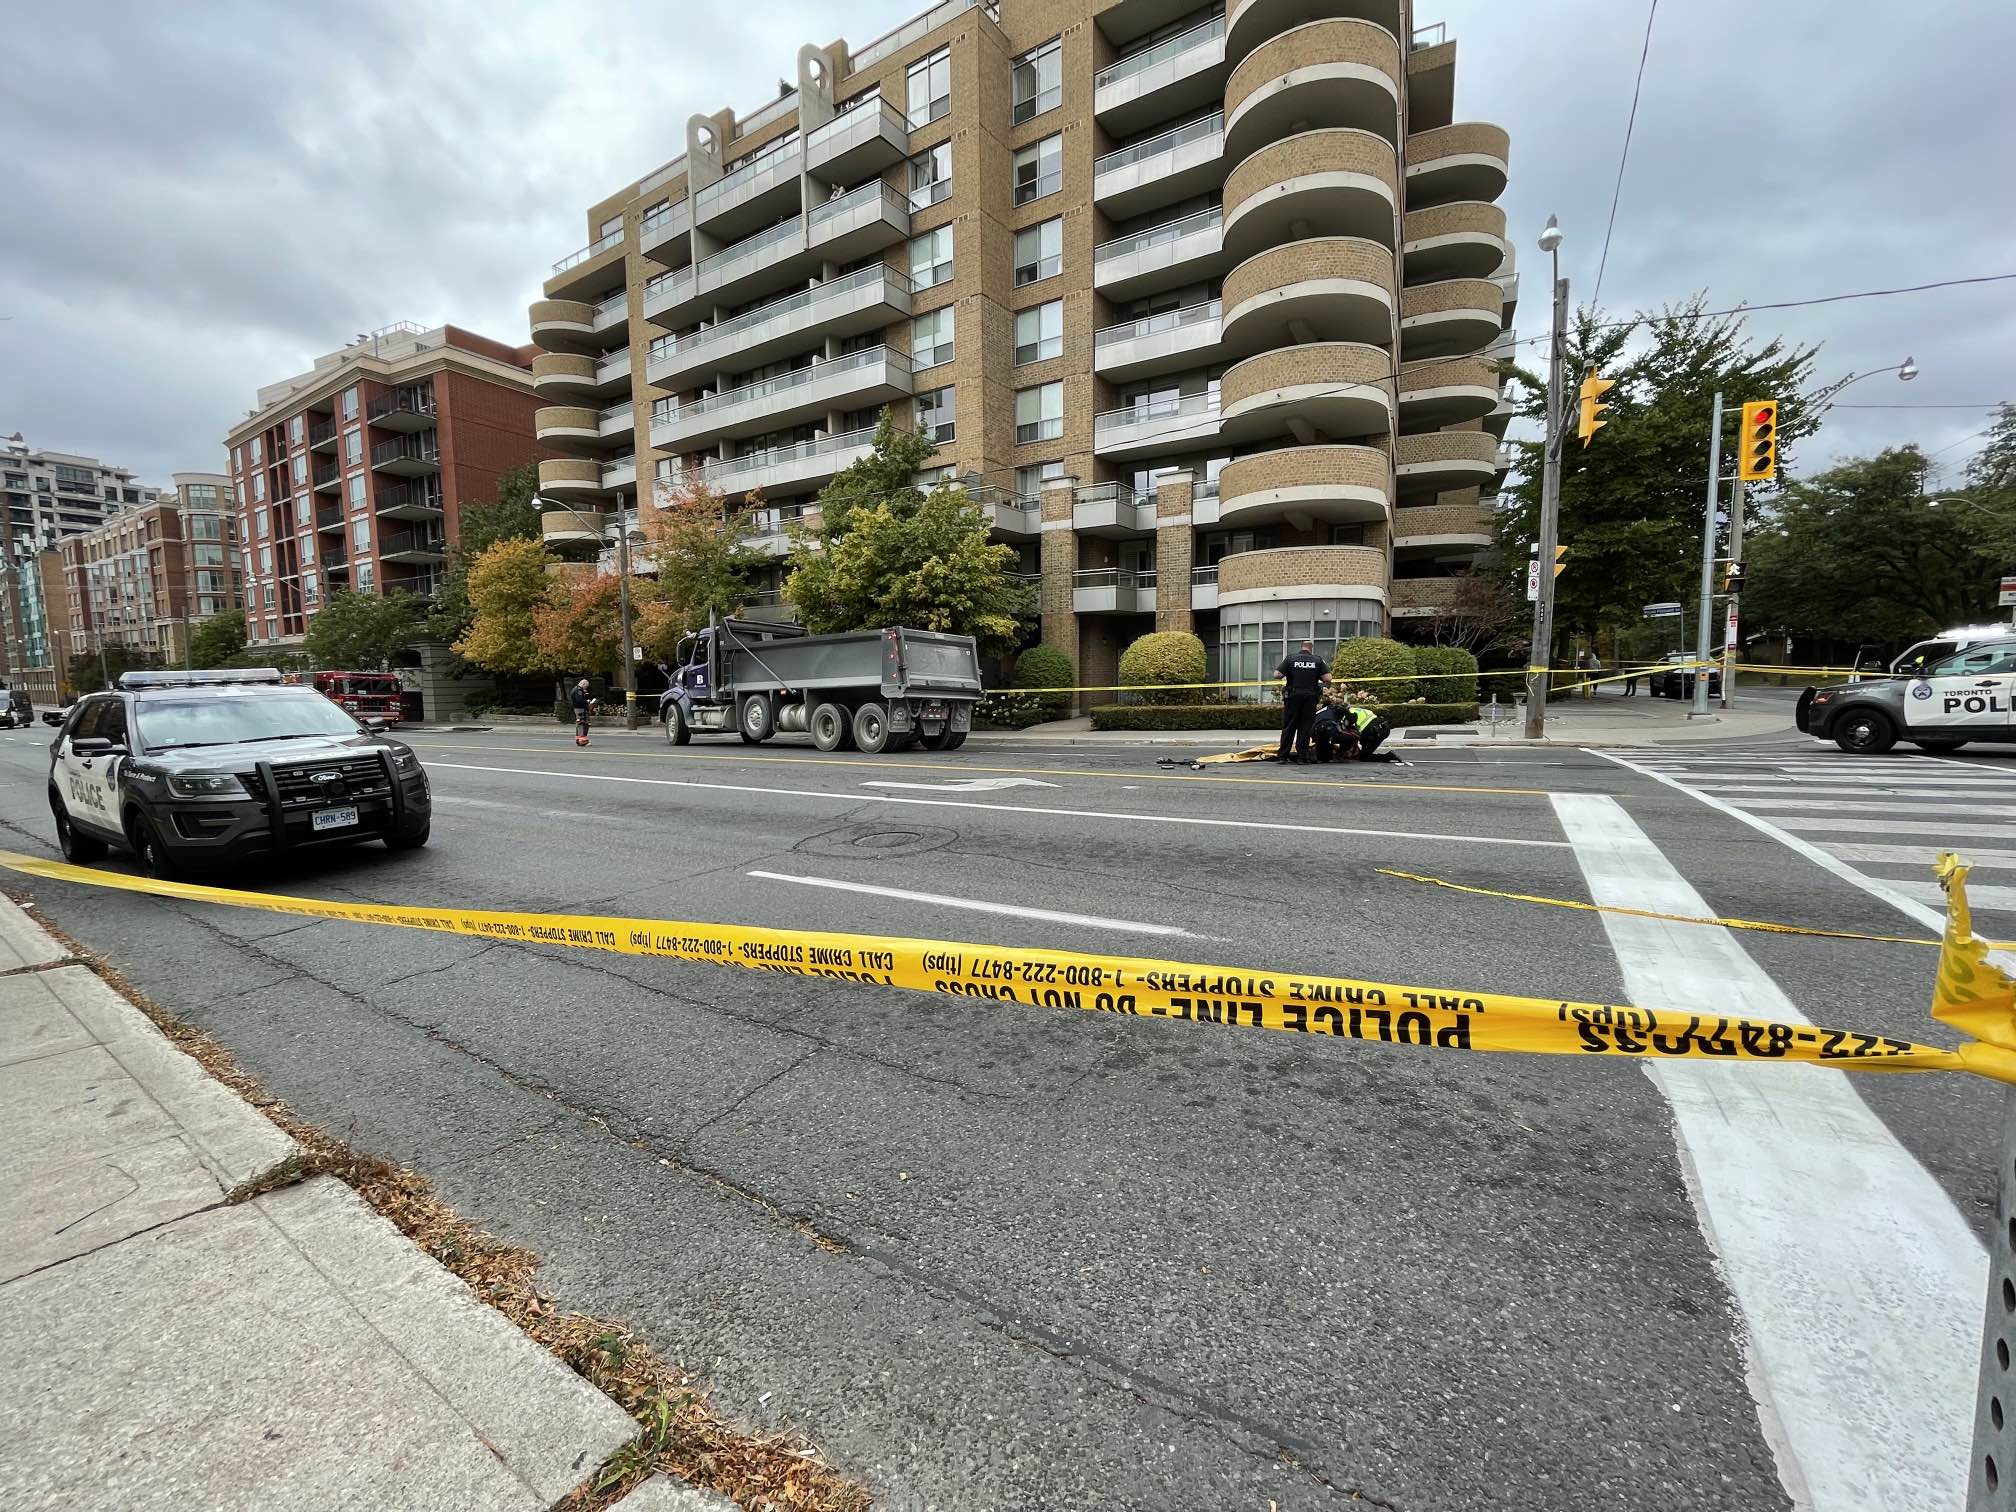 Woman on scooter dead after being hit by dump truck in Toronto